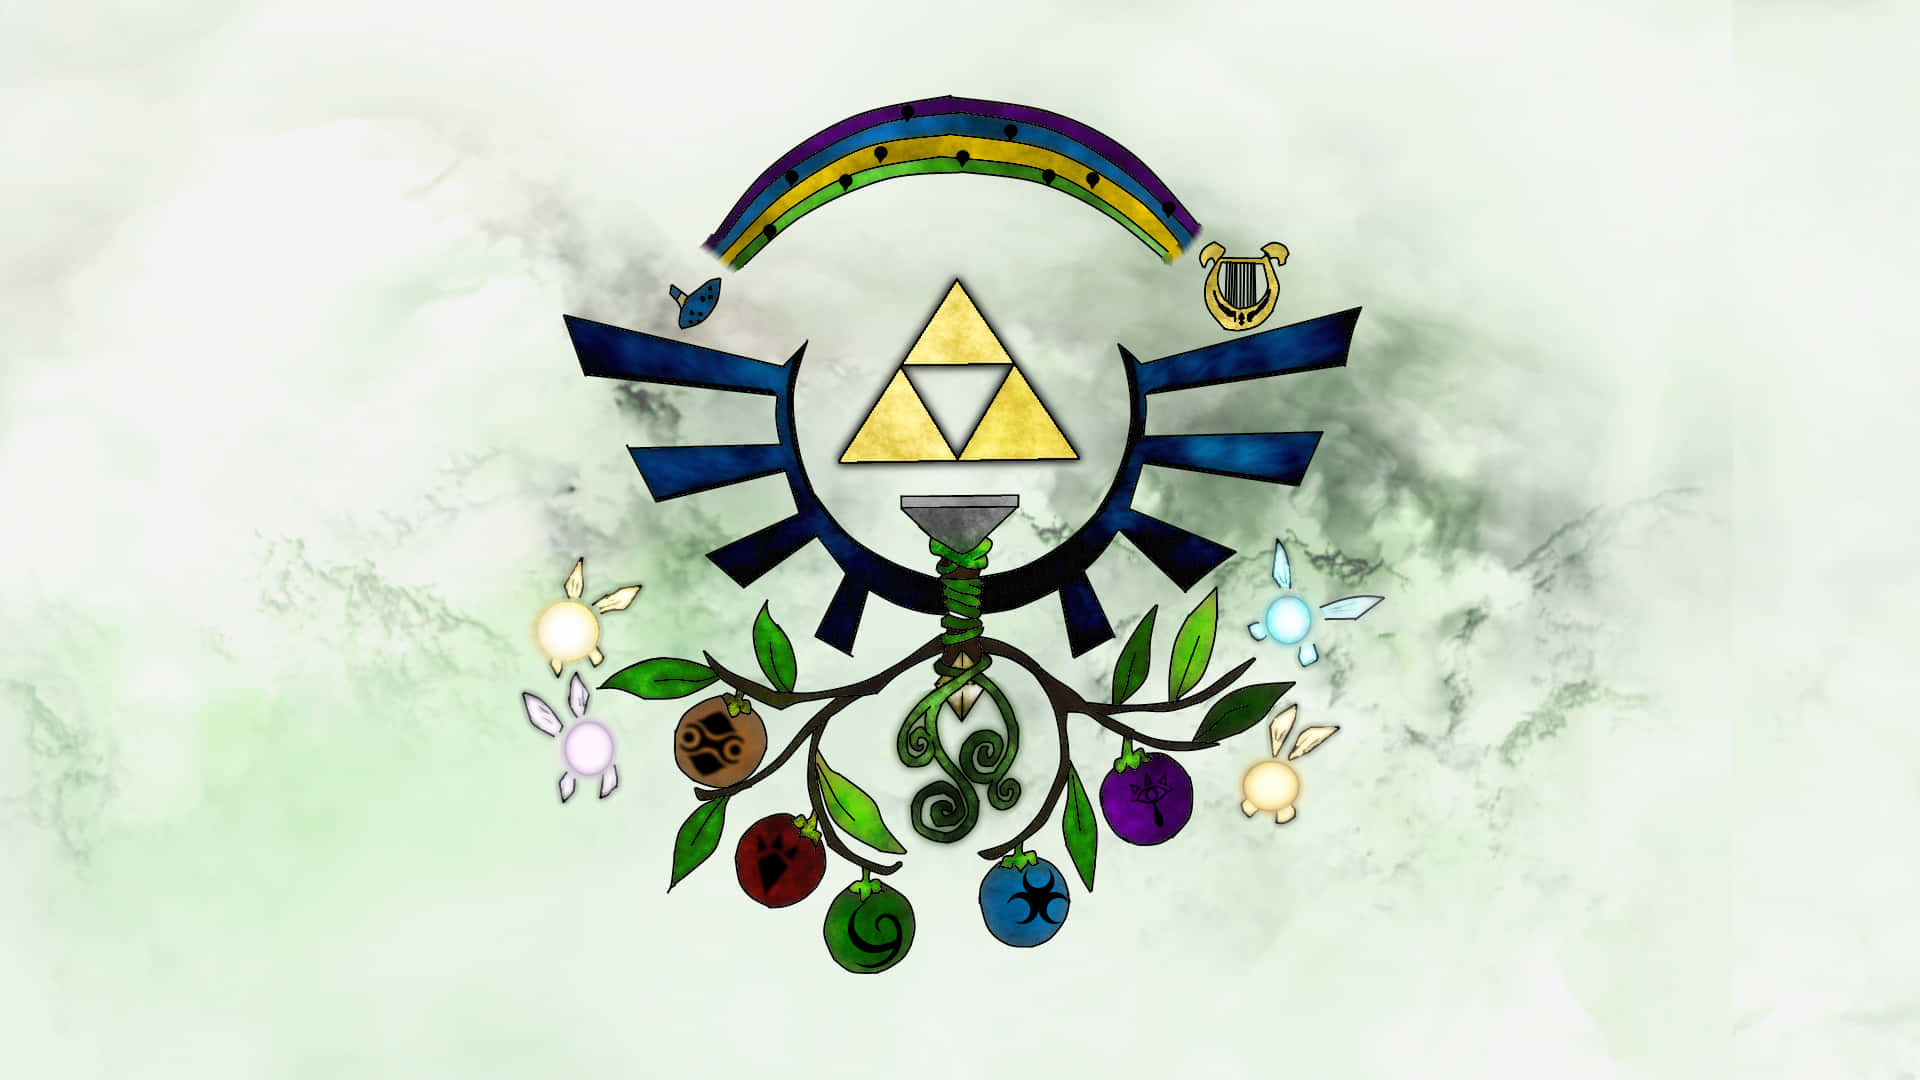 The Legend Of Zelda Logo With A Tree And A Symbol